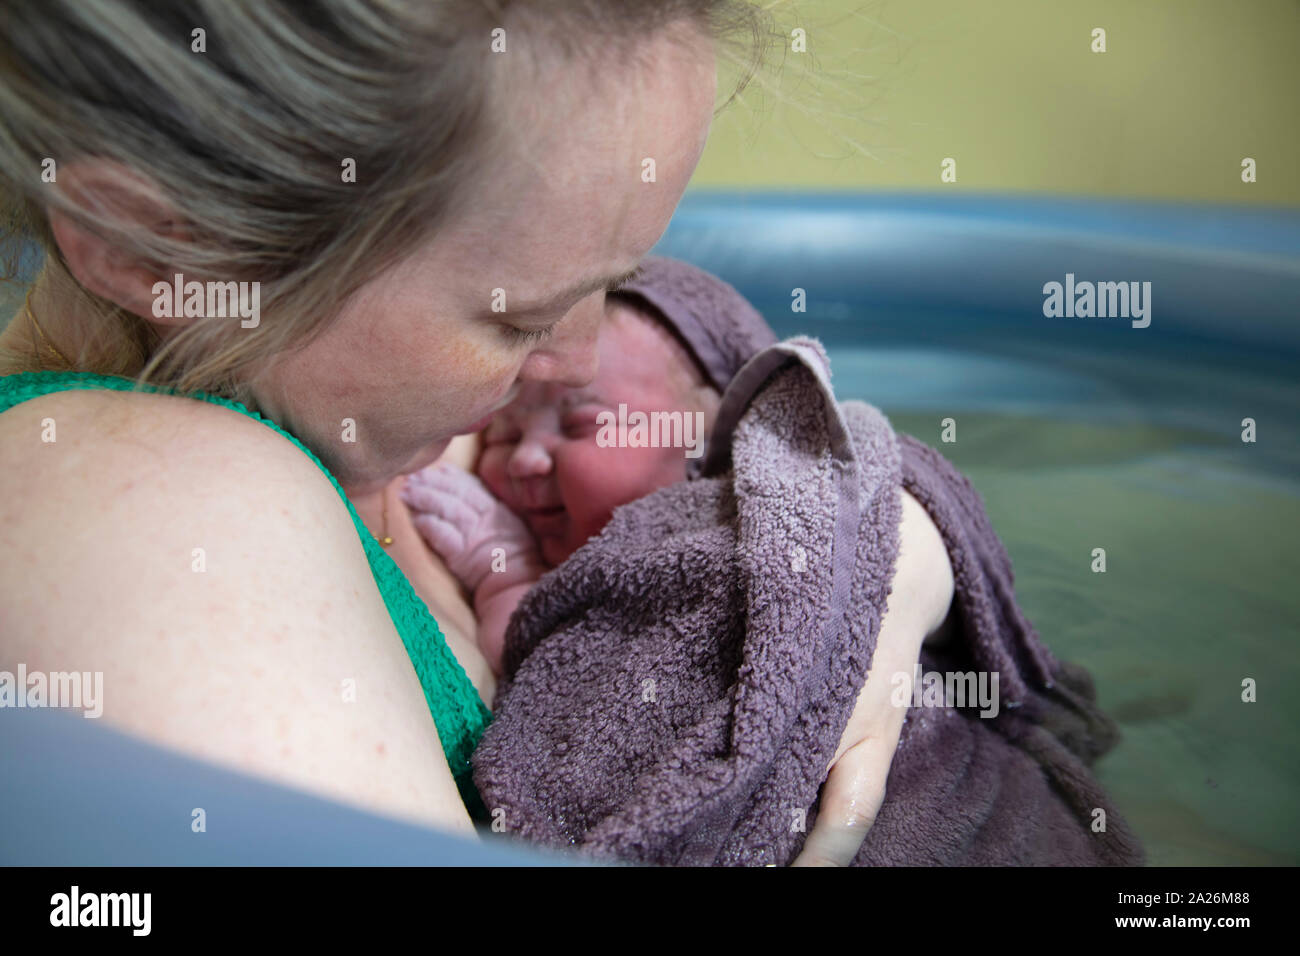 A new mother embracing her newborn baby after a natural pool home birth Stock Photo